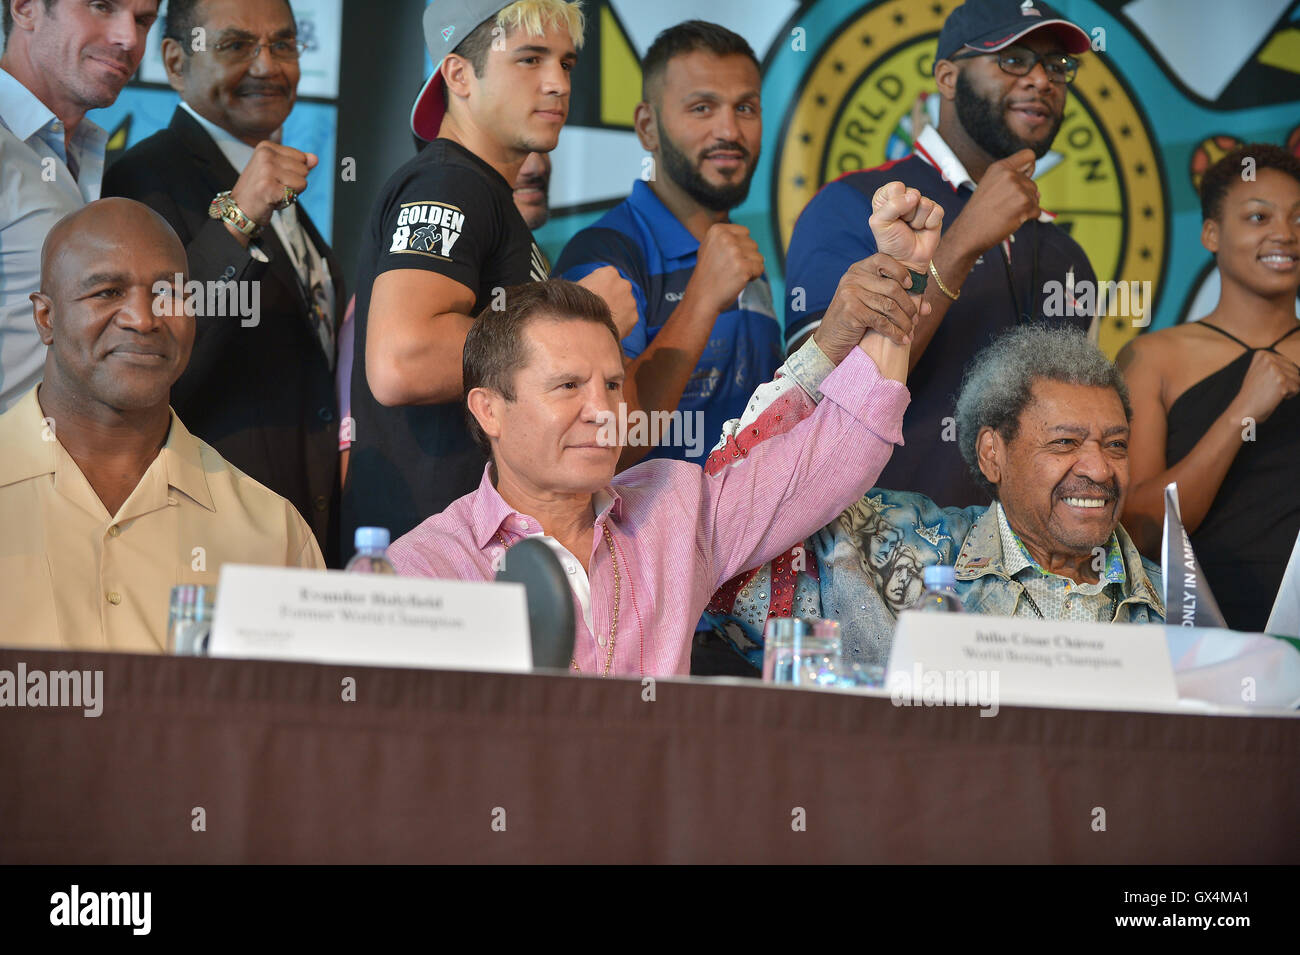 World Boxing Council press conference announcing important details about the WBC 54th Annual Convention at Diplomat Resort & Spa Hollywood  Featuring: (Top)Guest, Marvin Campbell, Niko Valdes, Dino Spencer, Joe Fournier, Chassity Martin, (bottom) Evander Stock Photo